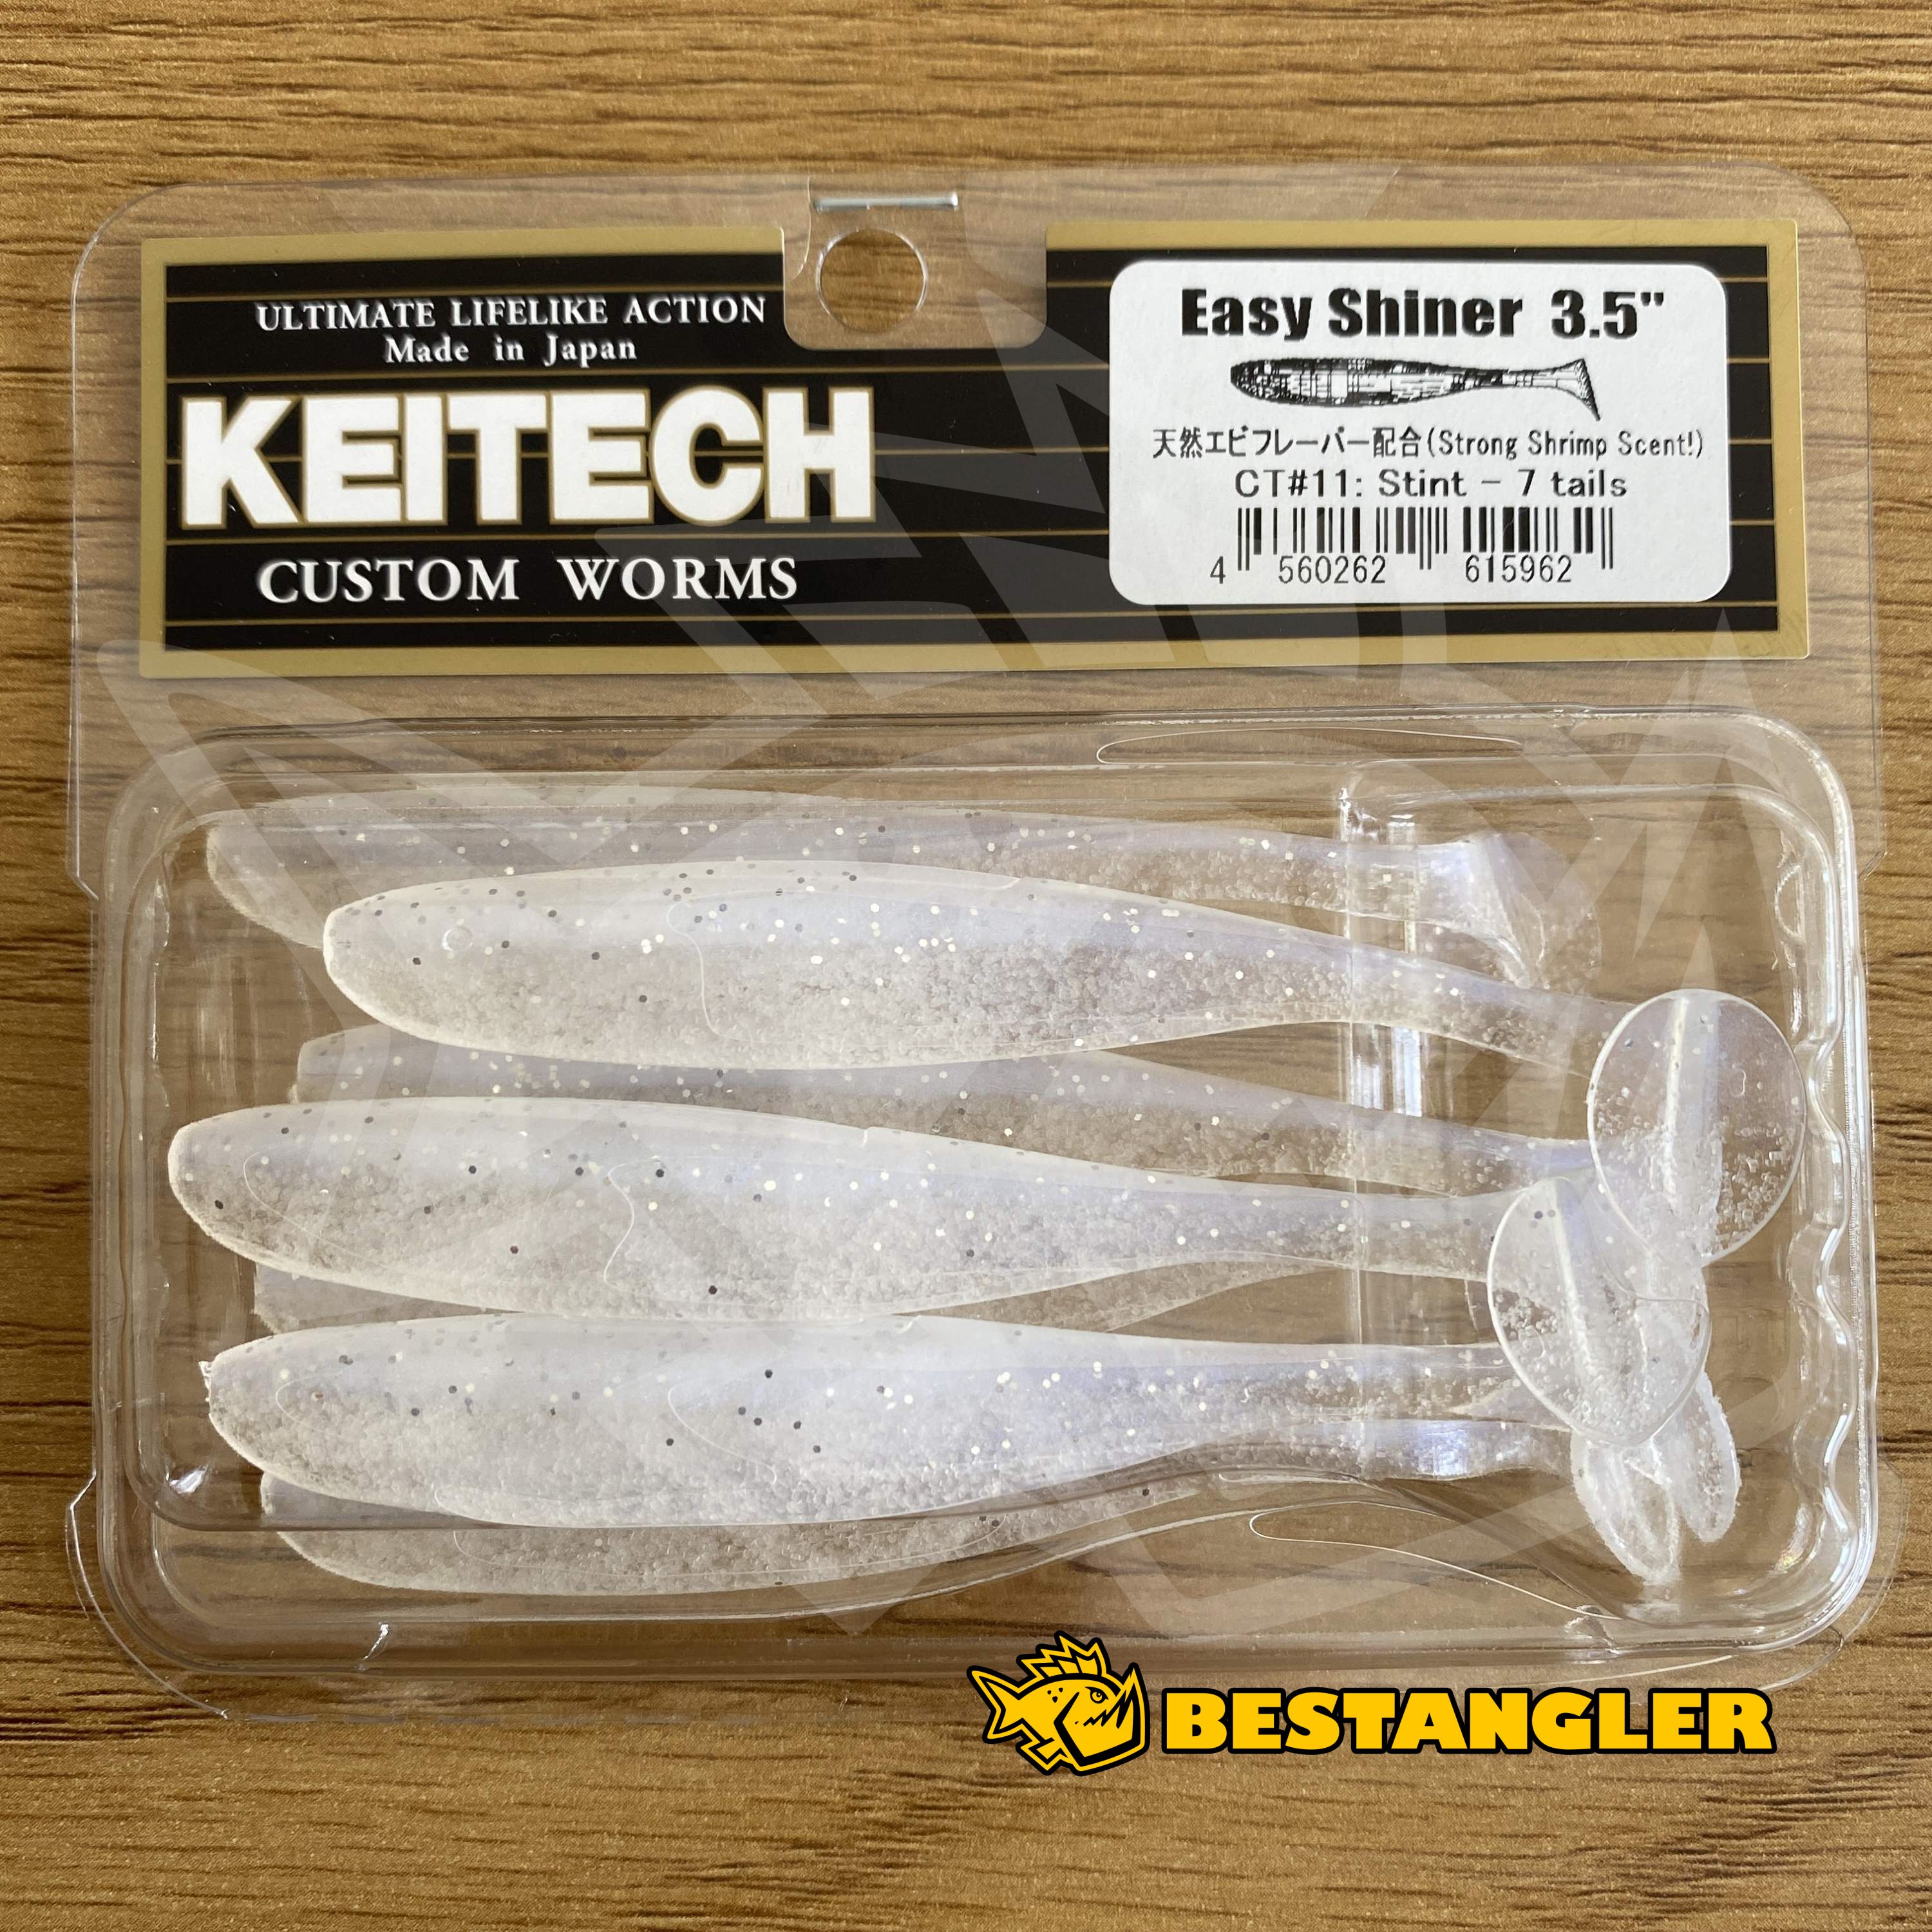 Keitech Easy Shiner, 3.5 in